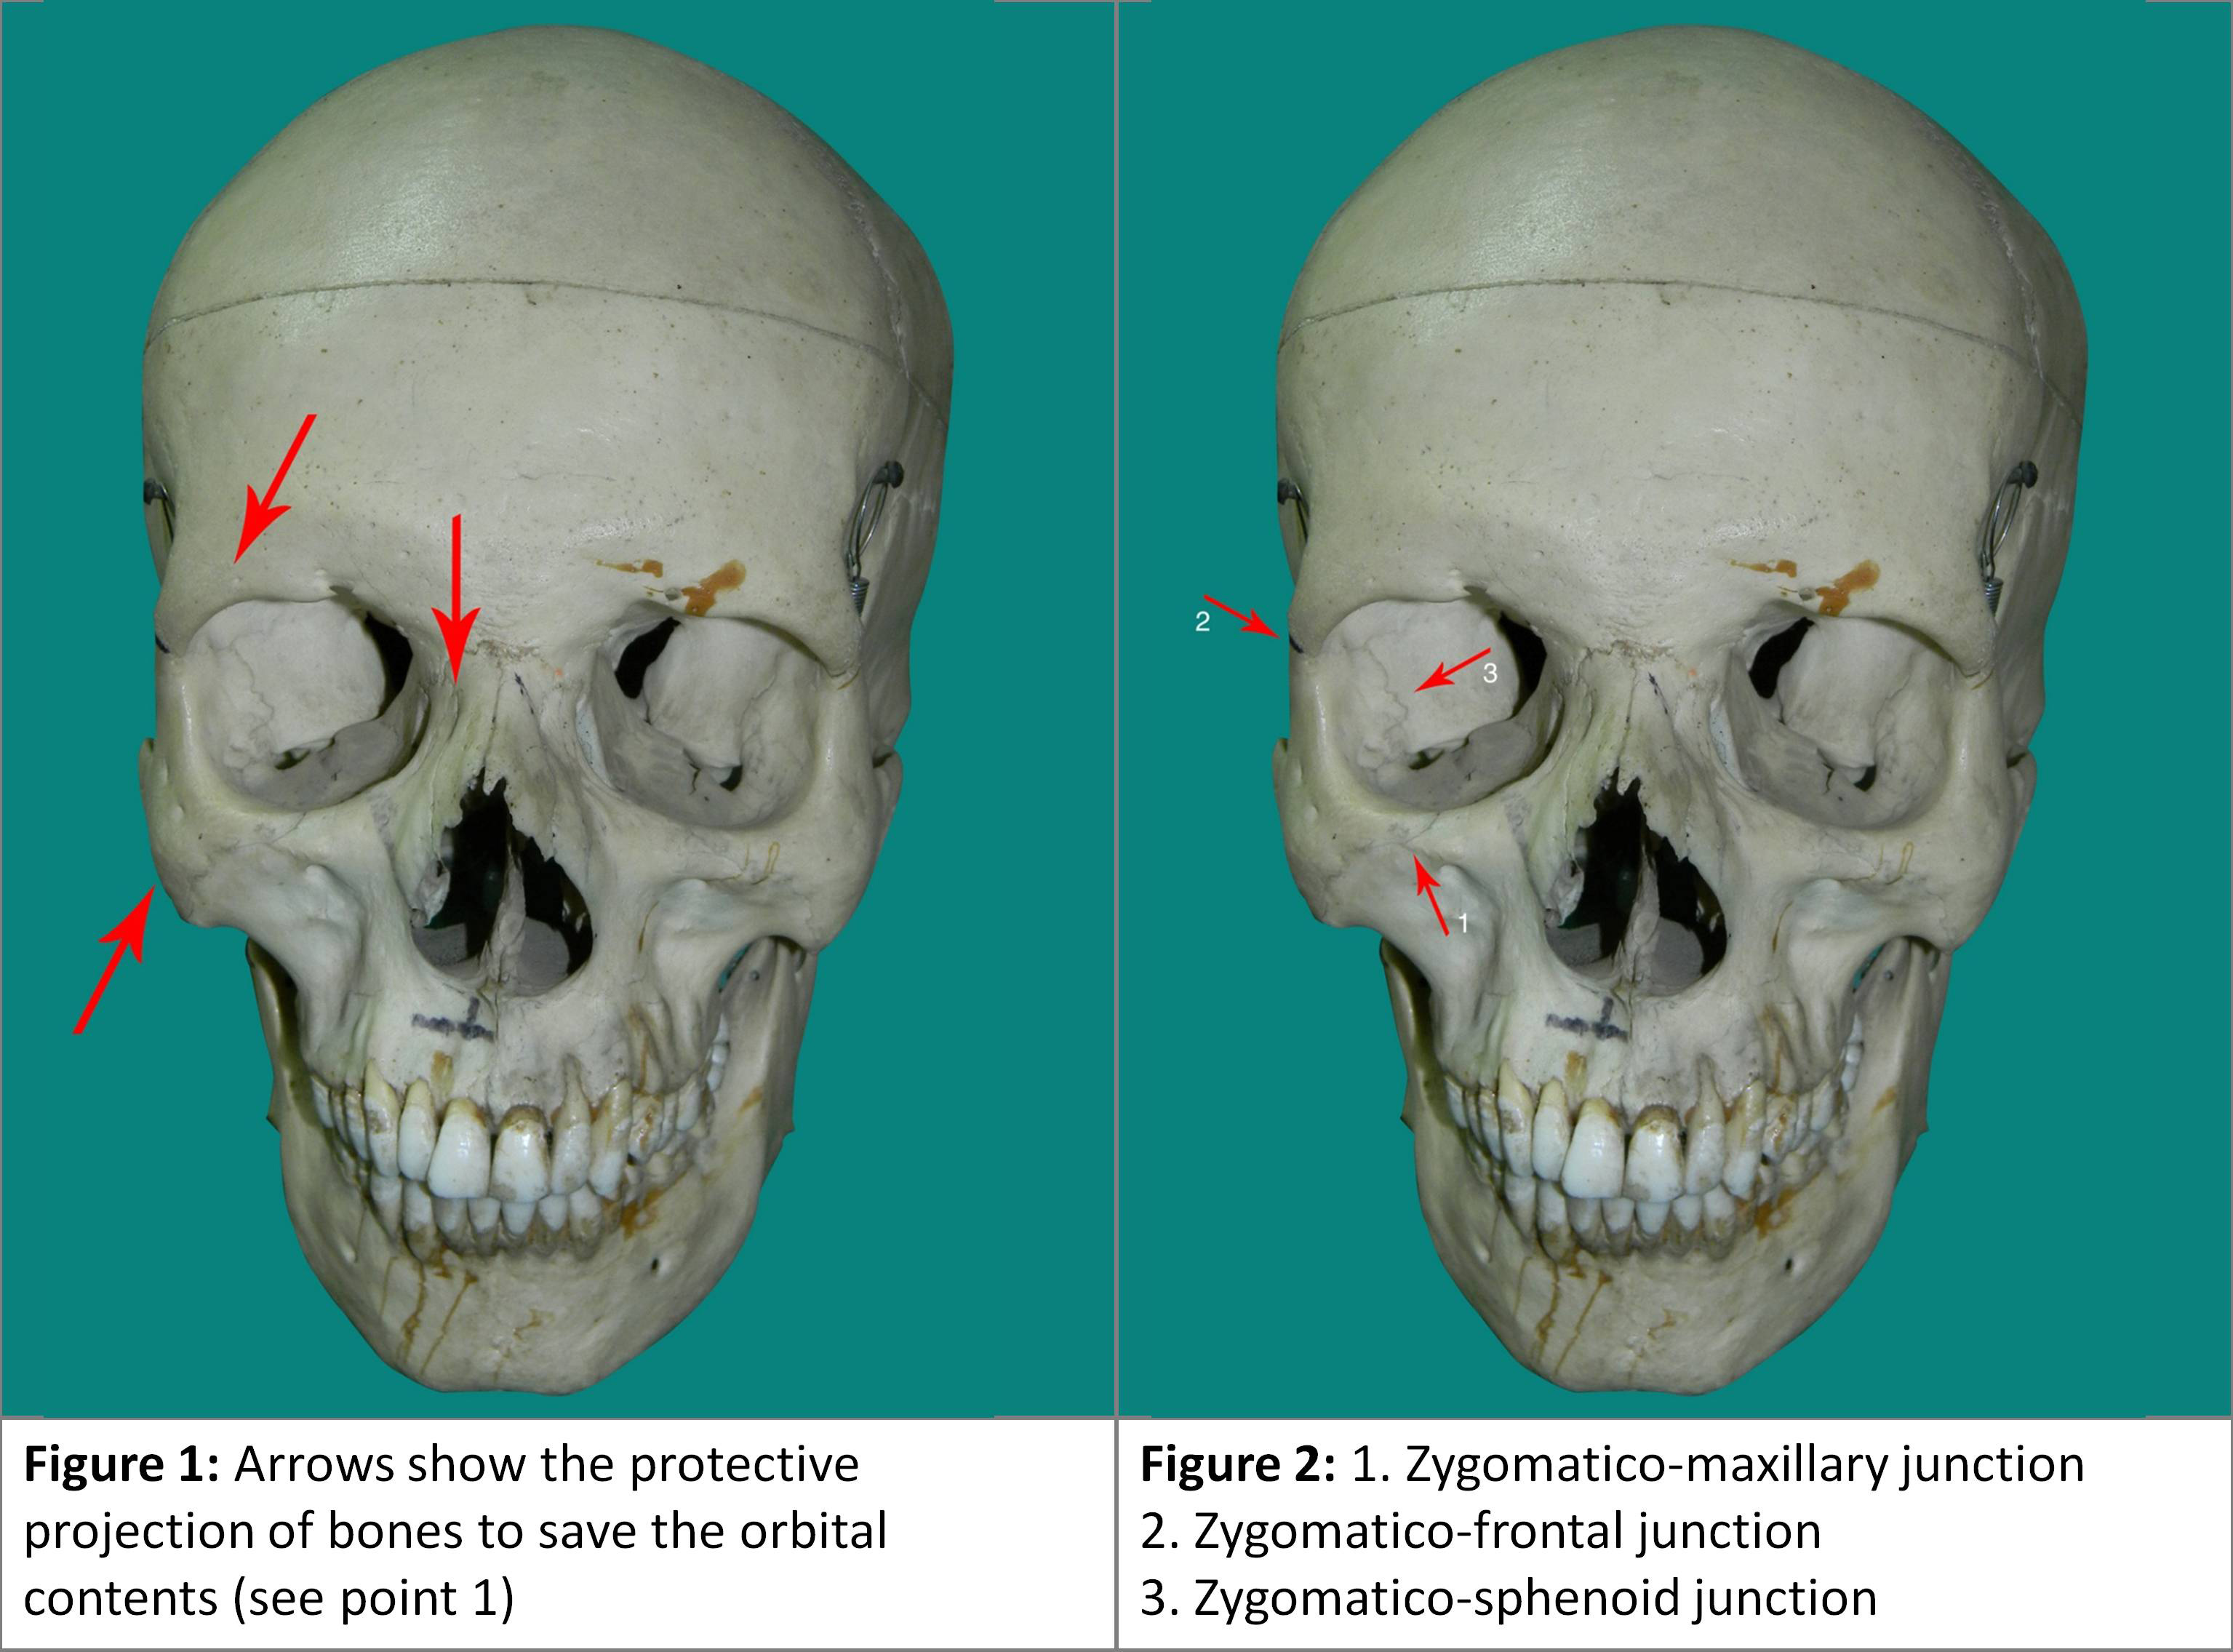 What is the common name for the zygomatic bone?